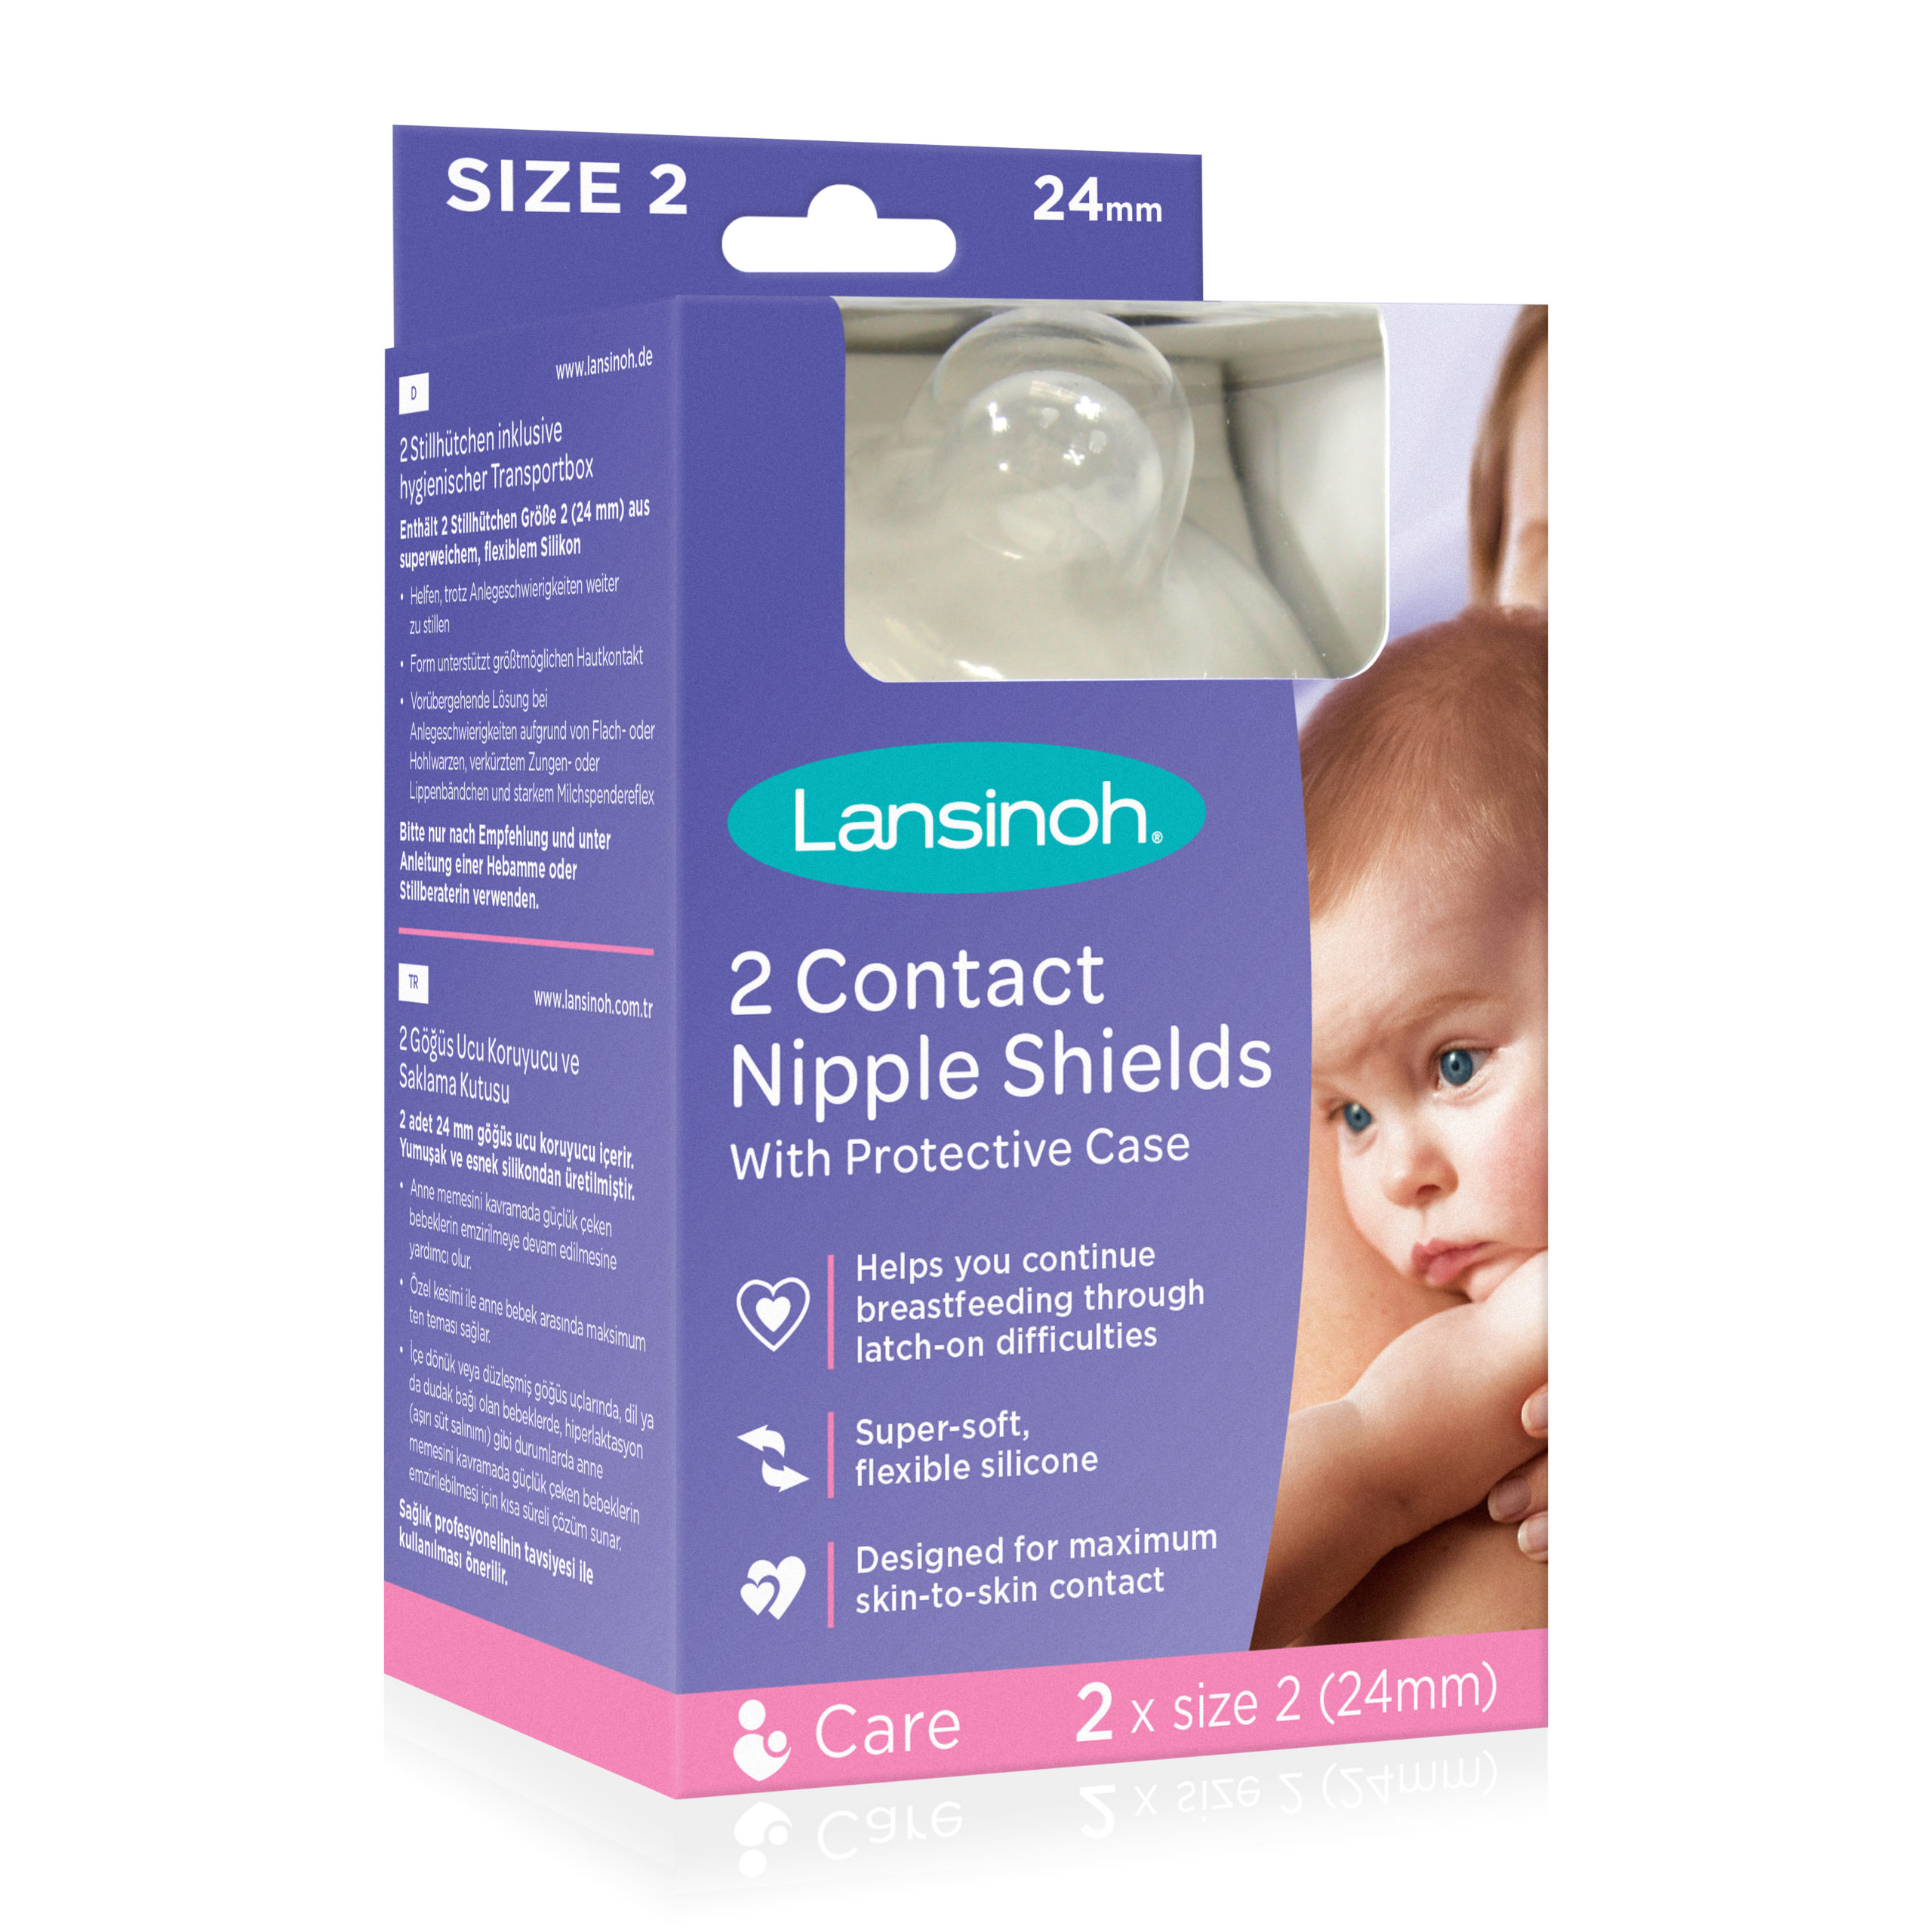 Lansinoh Contact Nipple Shields 2-24mm Contact Nipple Shields with Case 